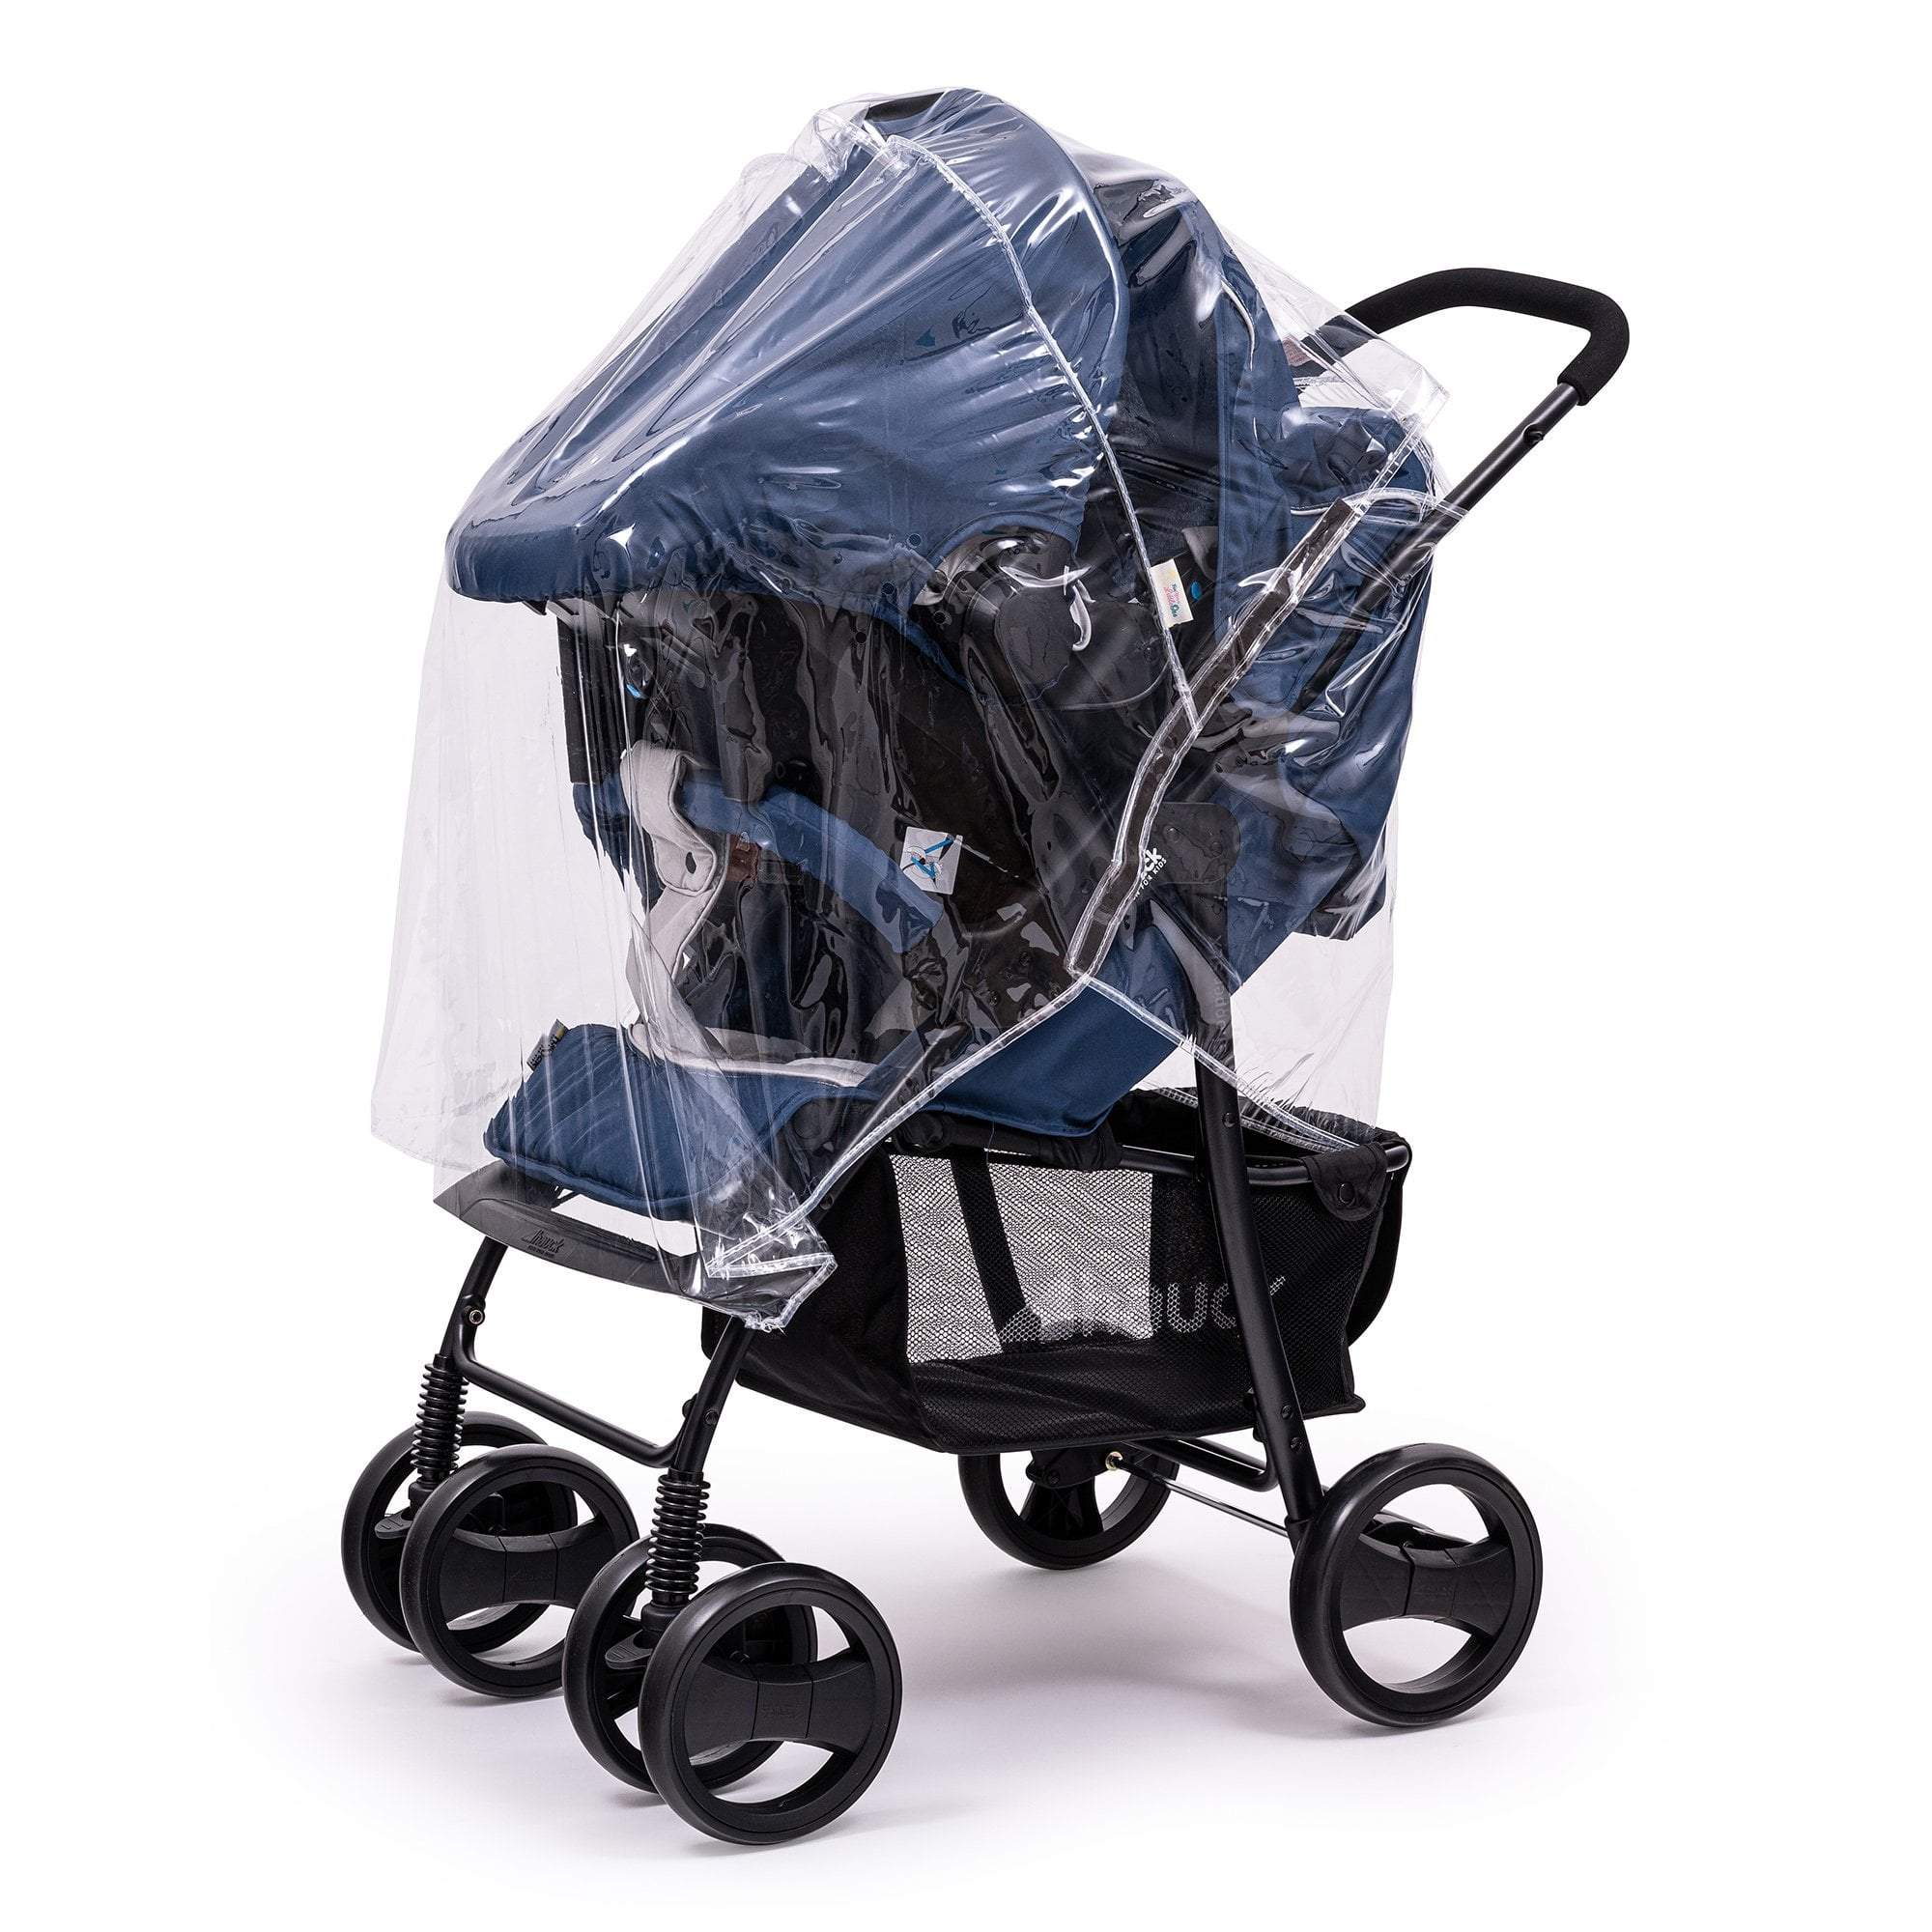 Travel System Raincover Compatible with Obaby - Fits All Models - For Your Little One